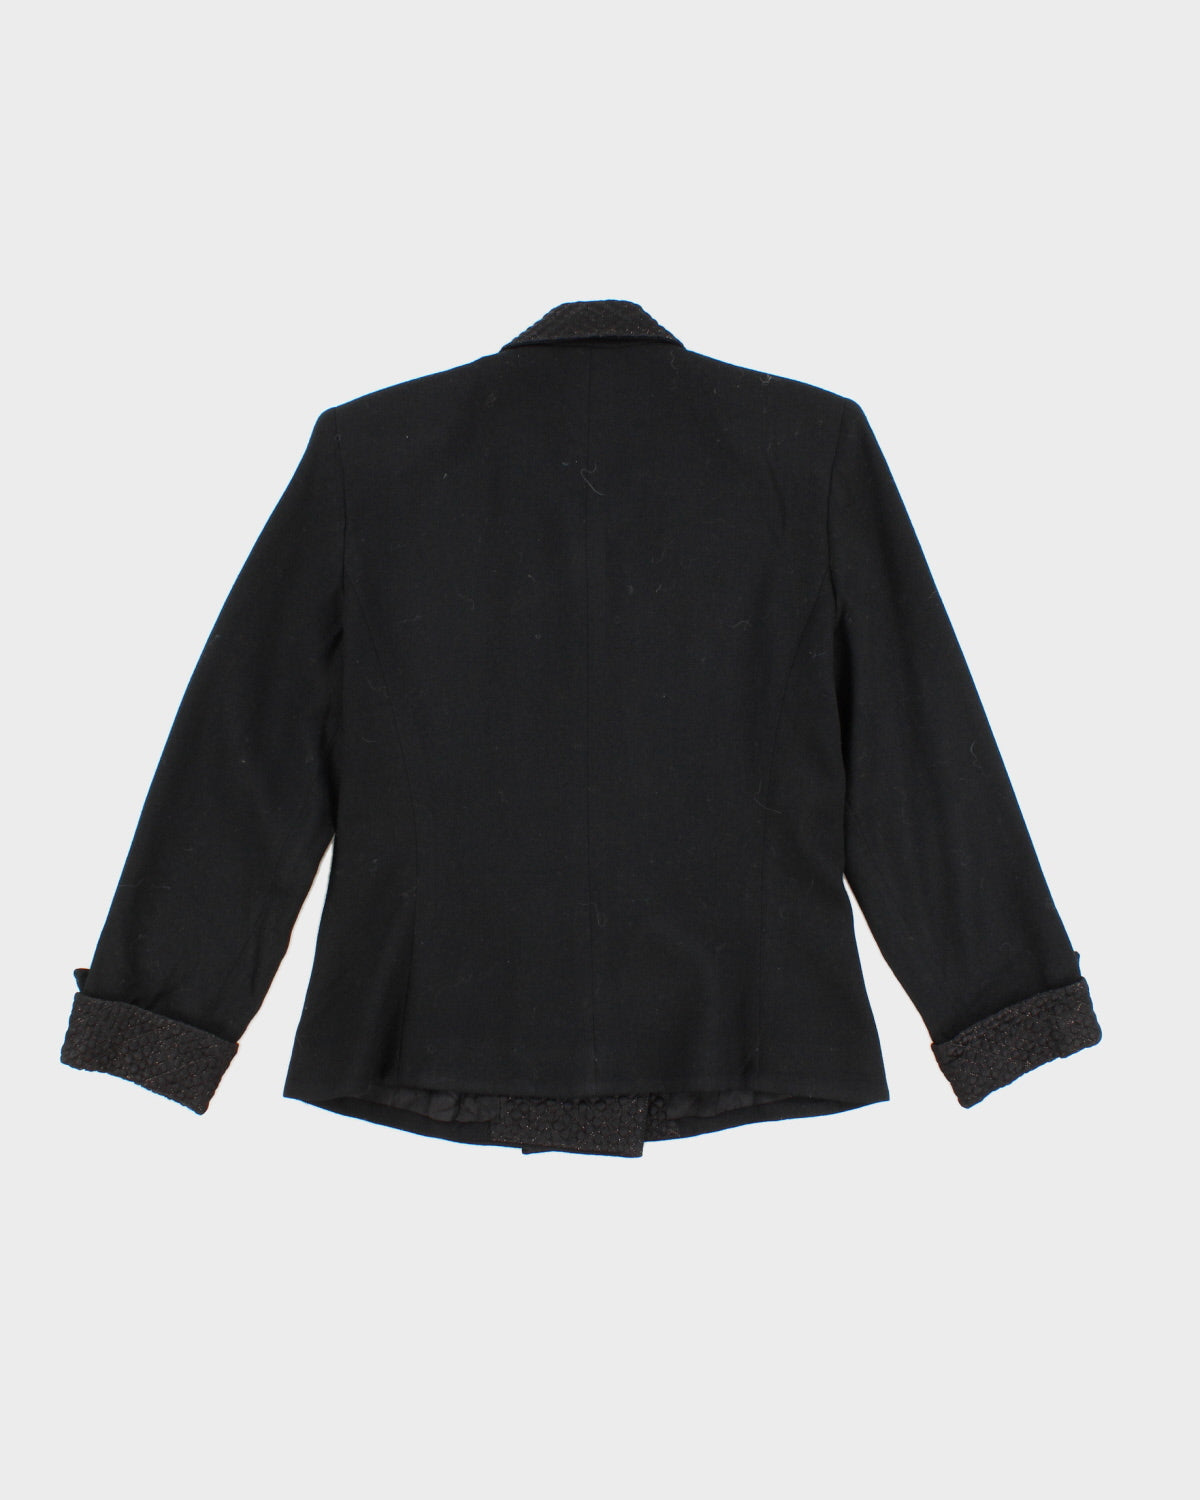 Womens Early 1990s Black Blazer with Gold Details - S